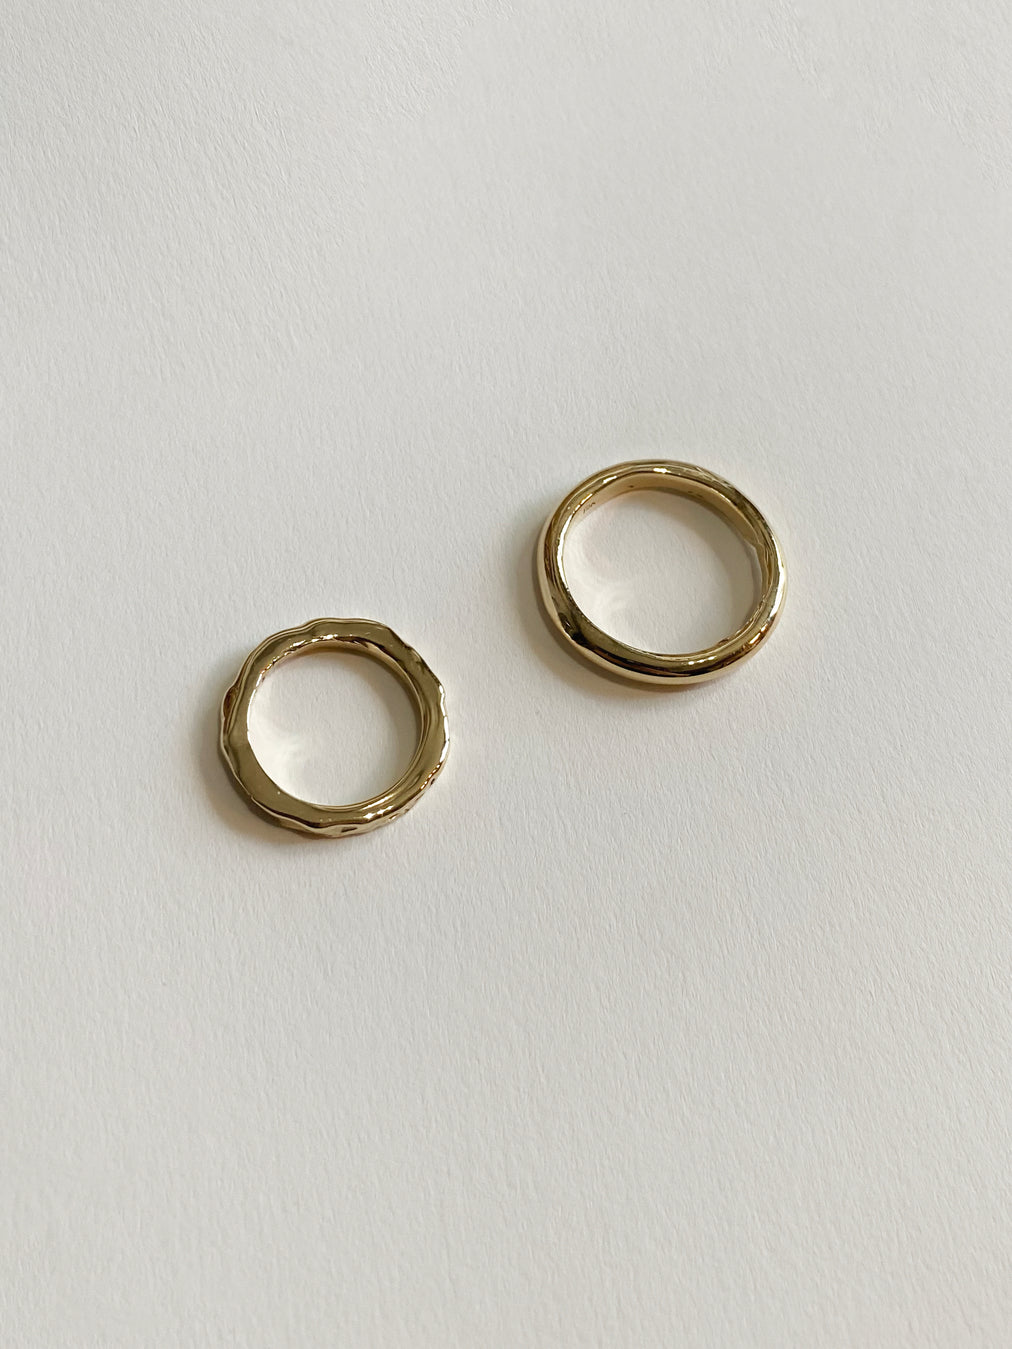 Side profile of two gold wedding rings on white background